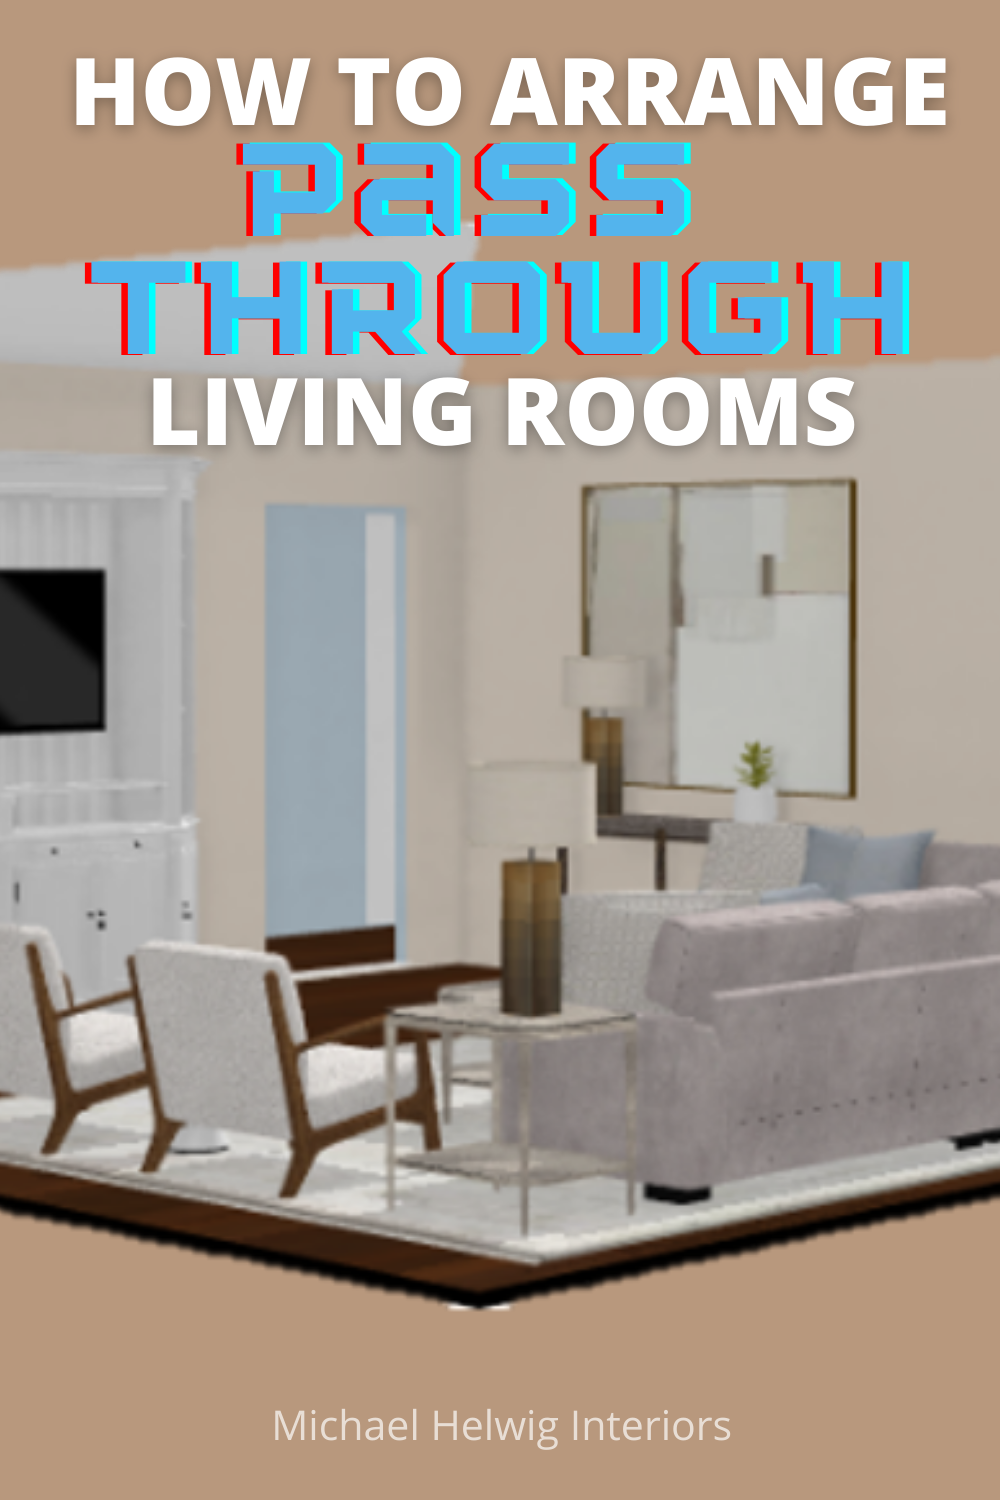 Ways to Maximize Seating in a Small Living Room